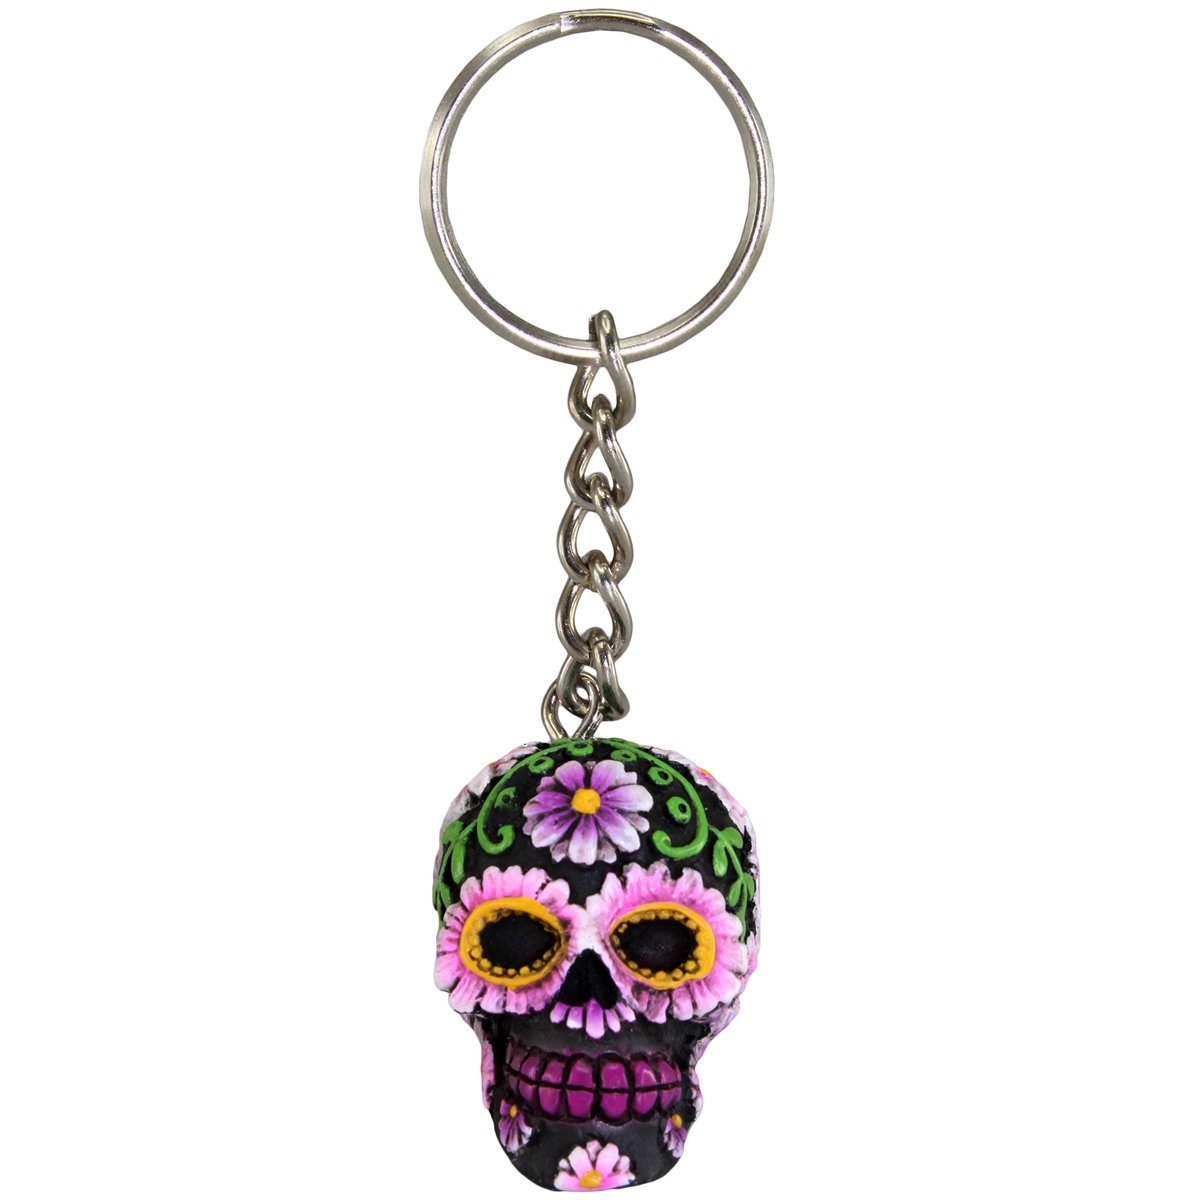 Details about   Day Of The Dead Funky Keyring PVC Keychain Ring Novelty Gift Candy Skull 